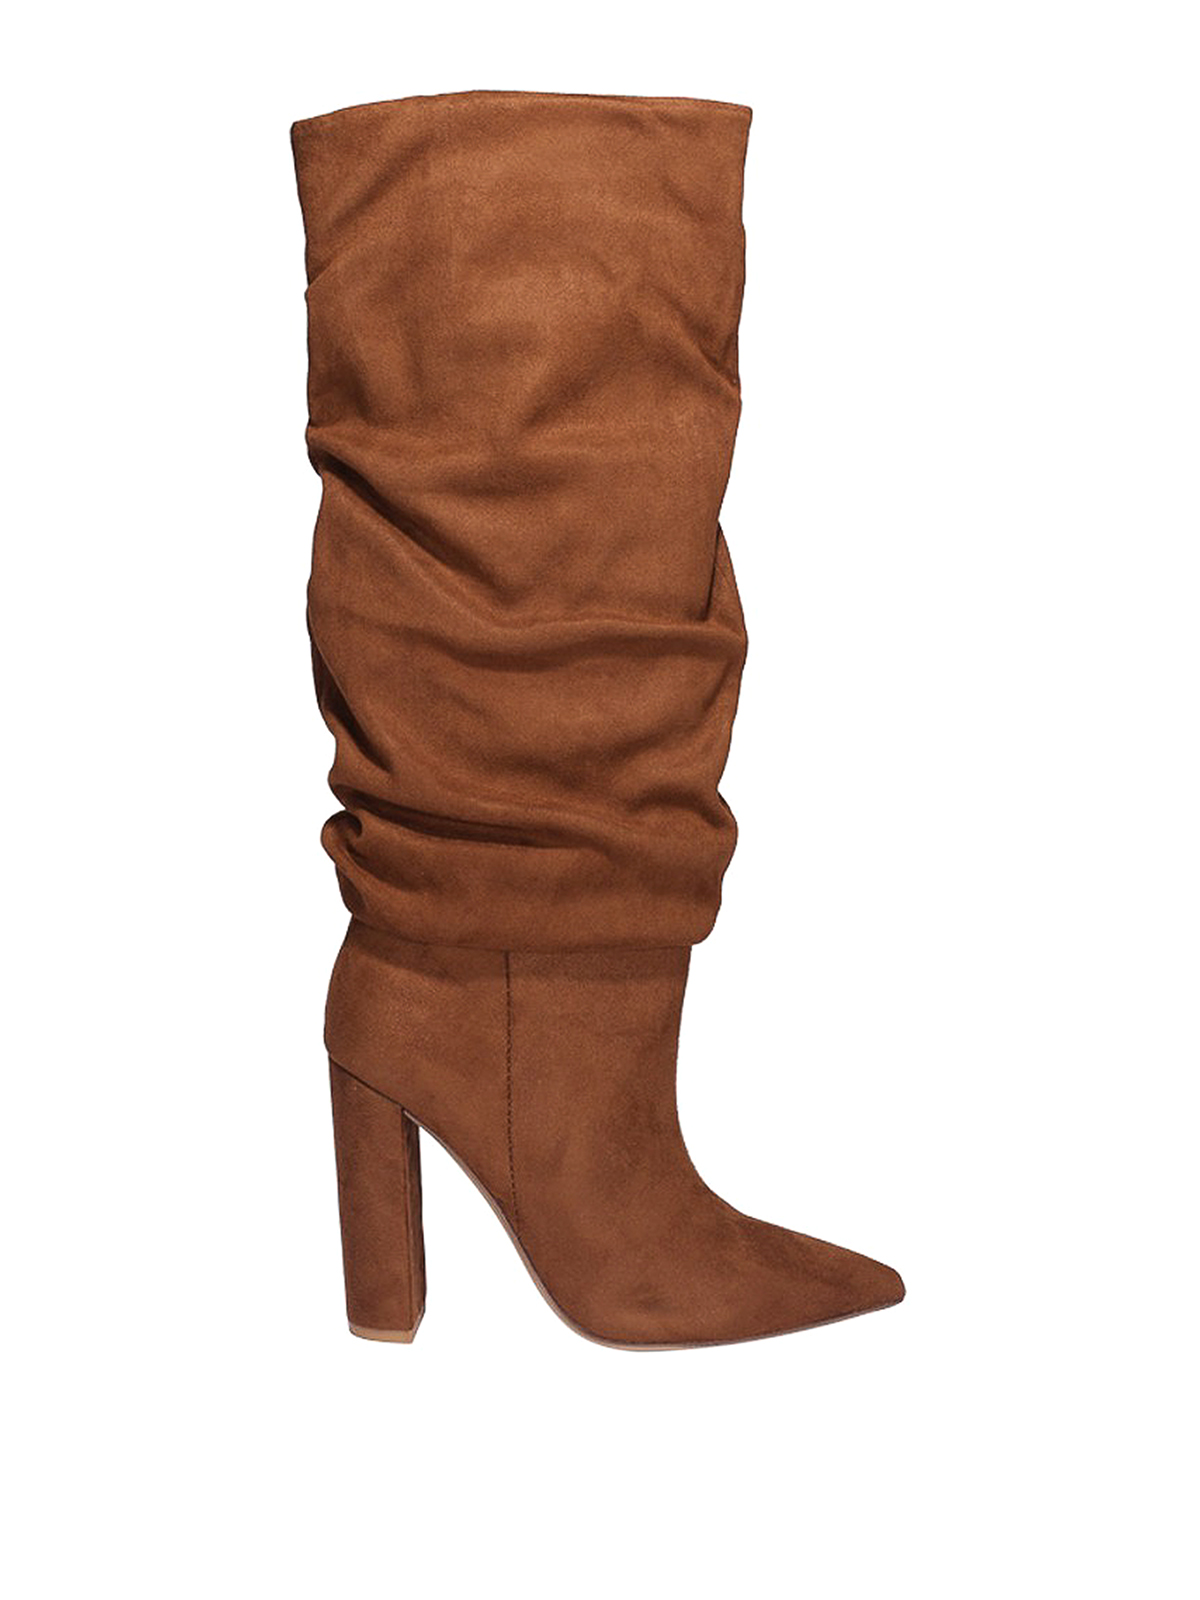 steve madden tan suede boots